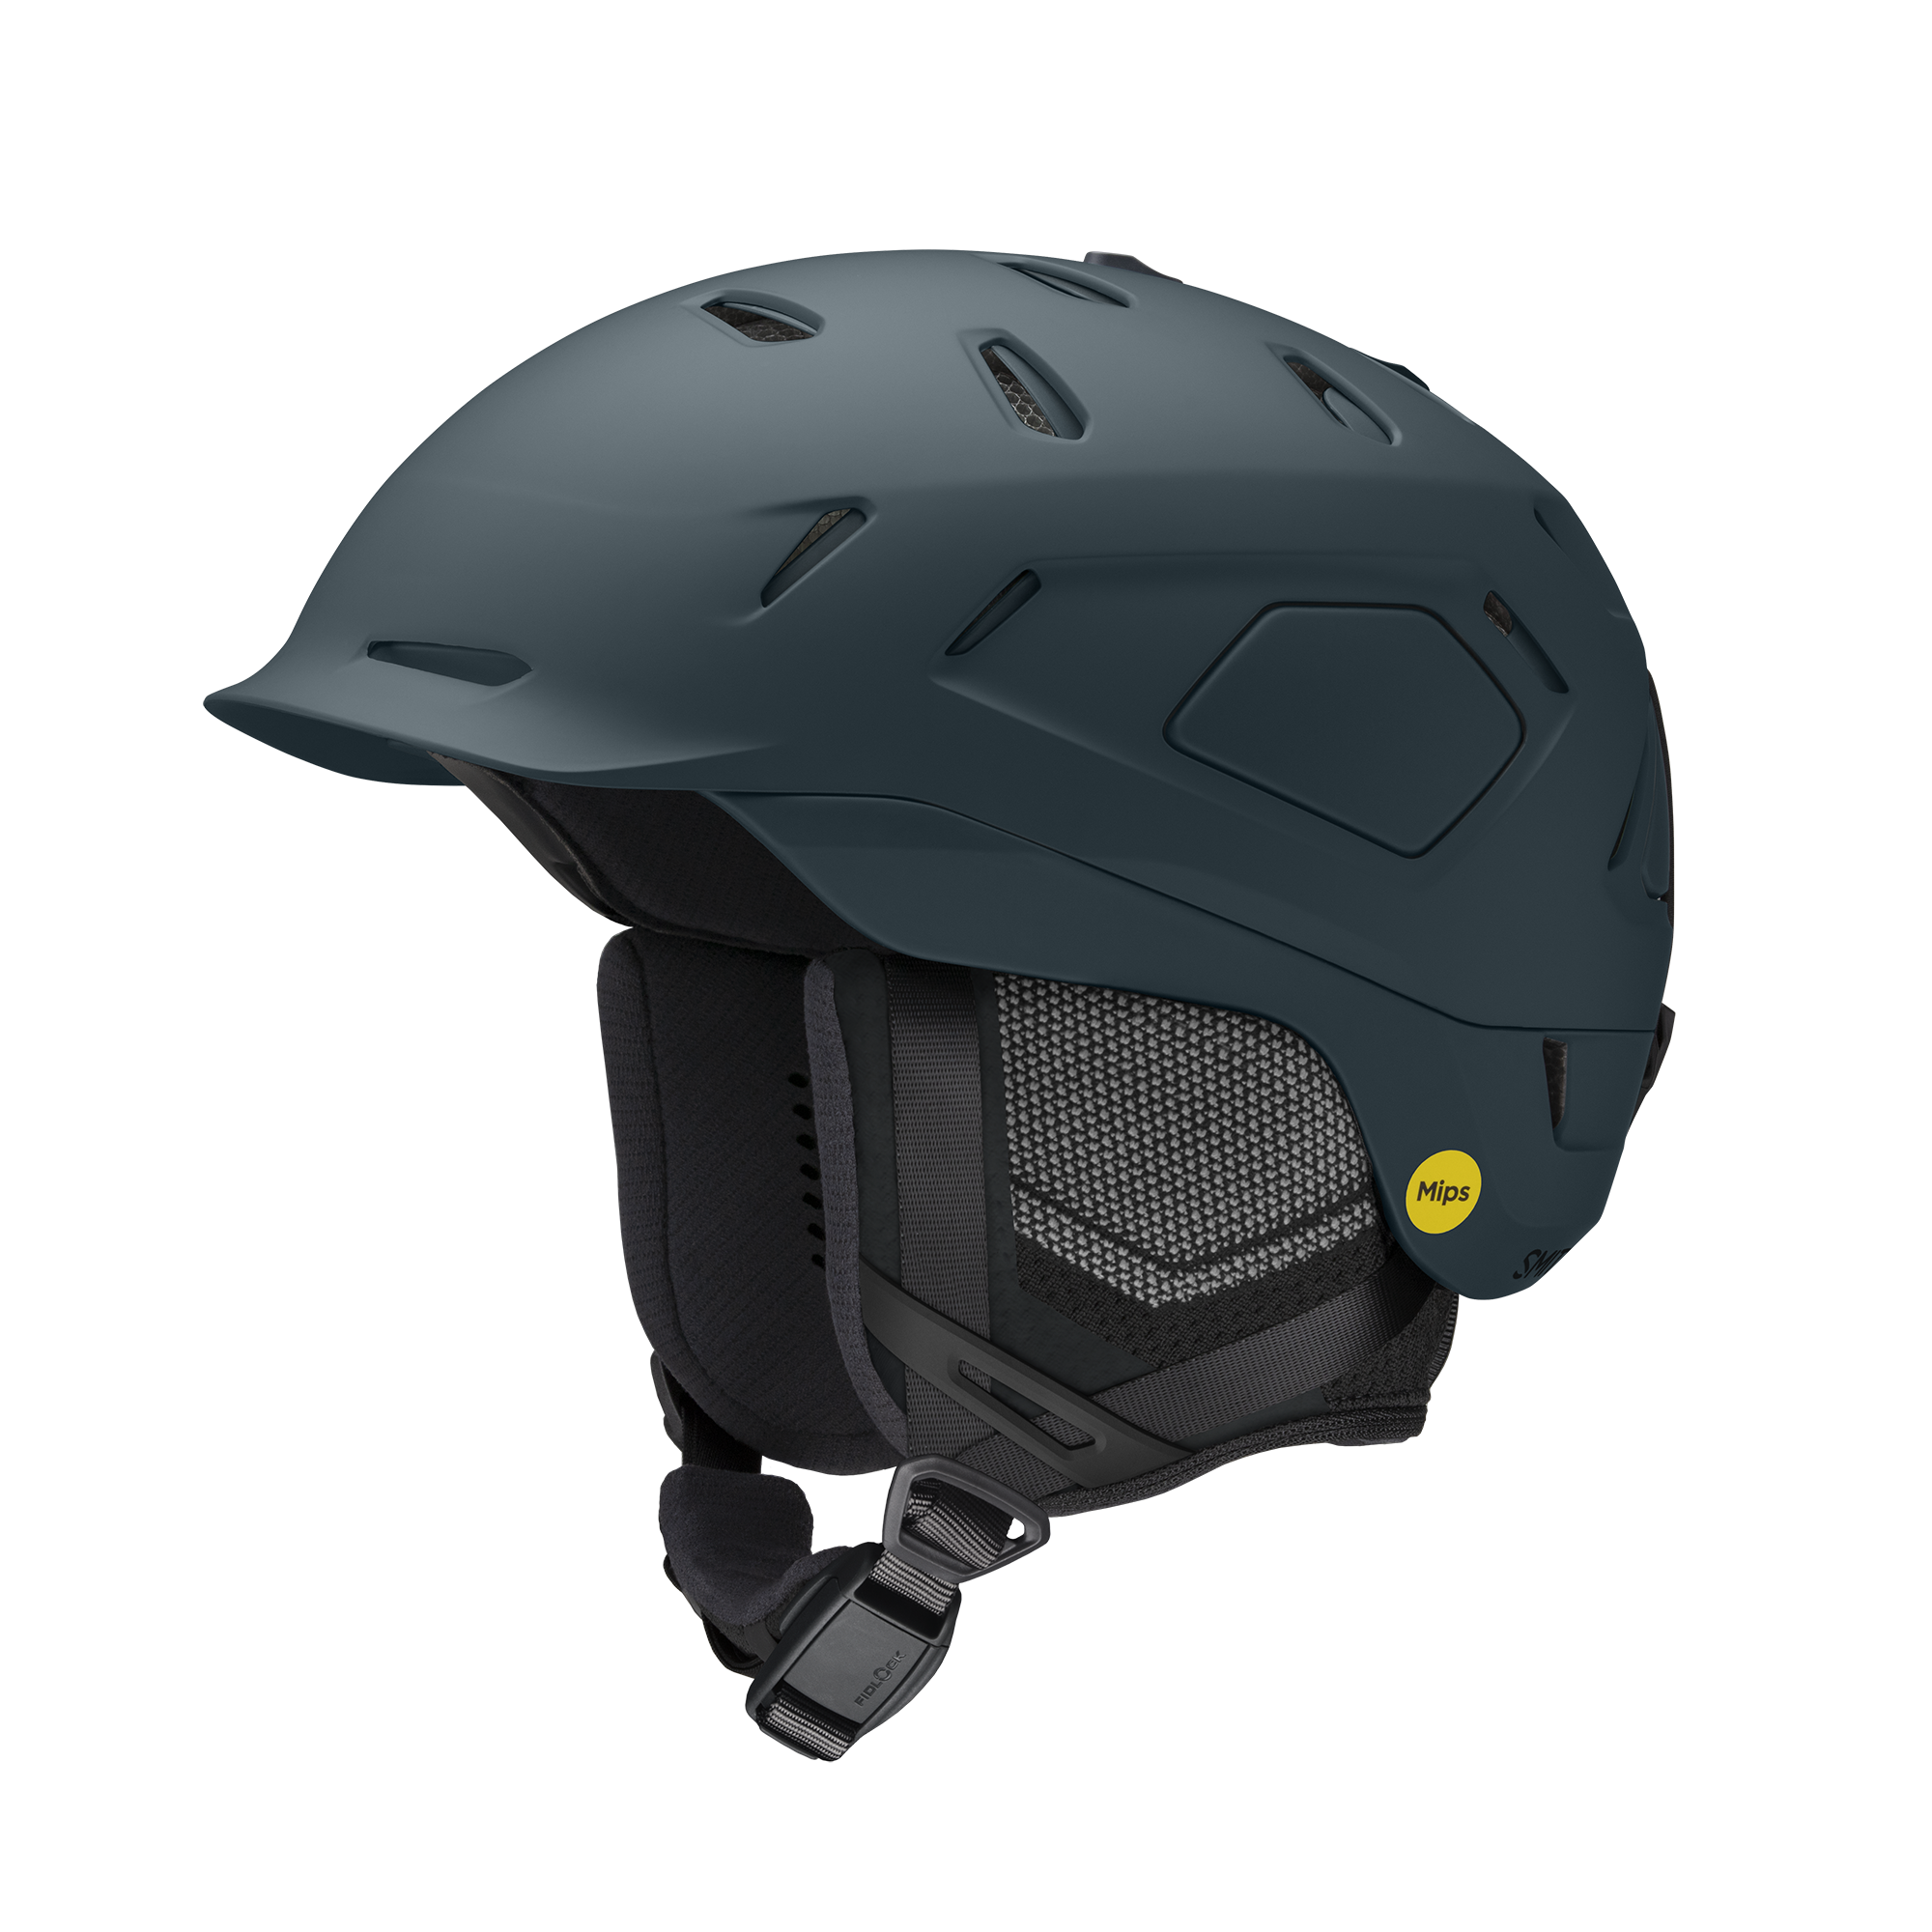 Smith Nexus MIPS ski helmet in matte pacific (dark blue) with MIPS logo and soft grey/black ear pieces. Air vents throughout.